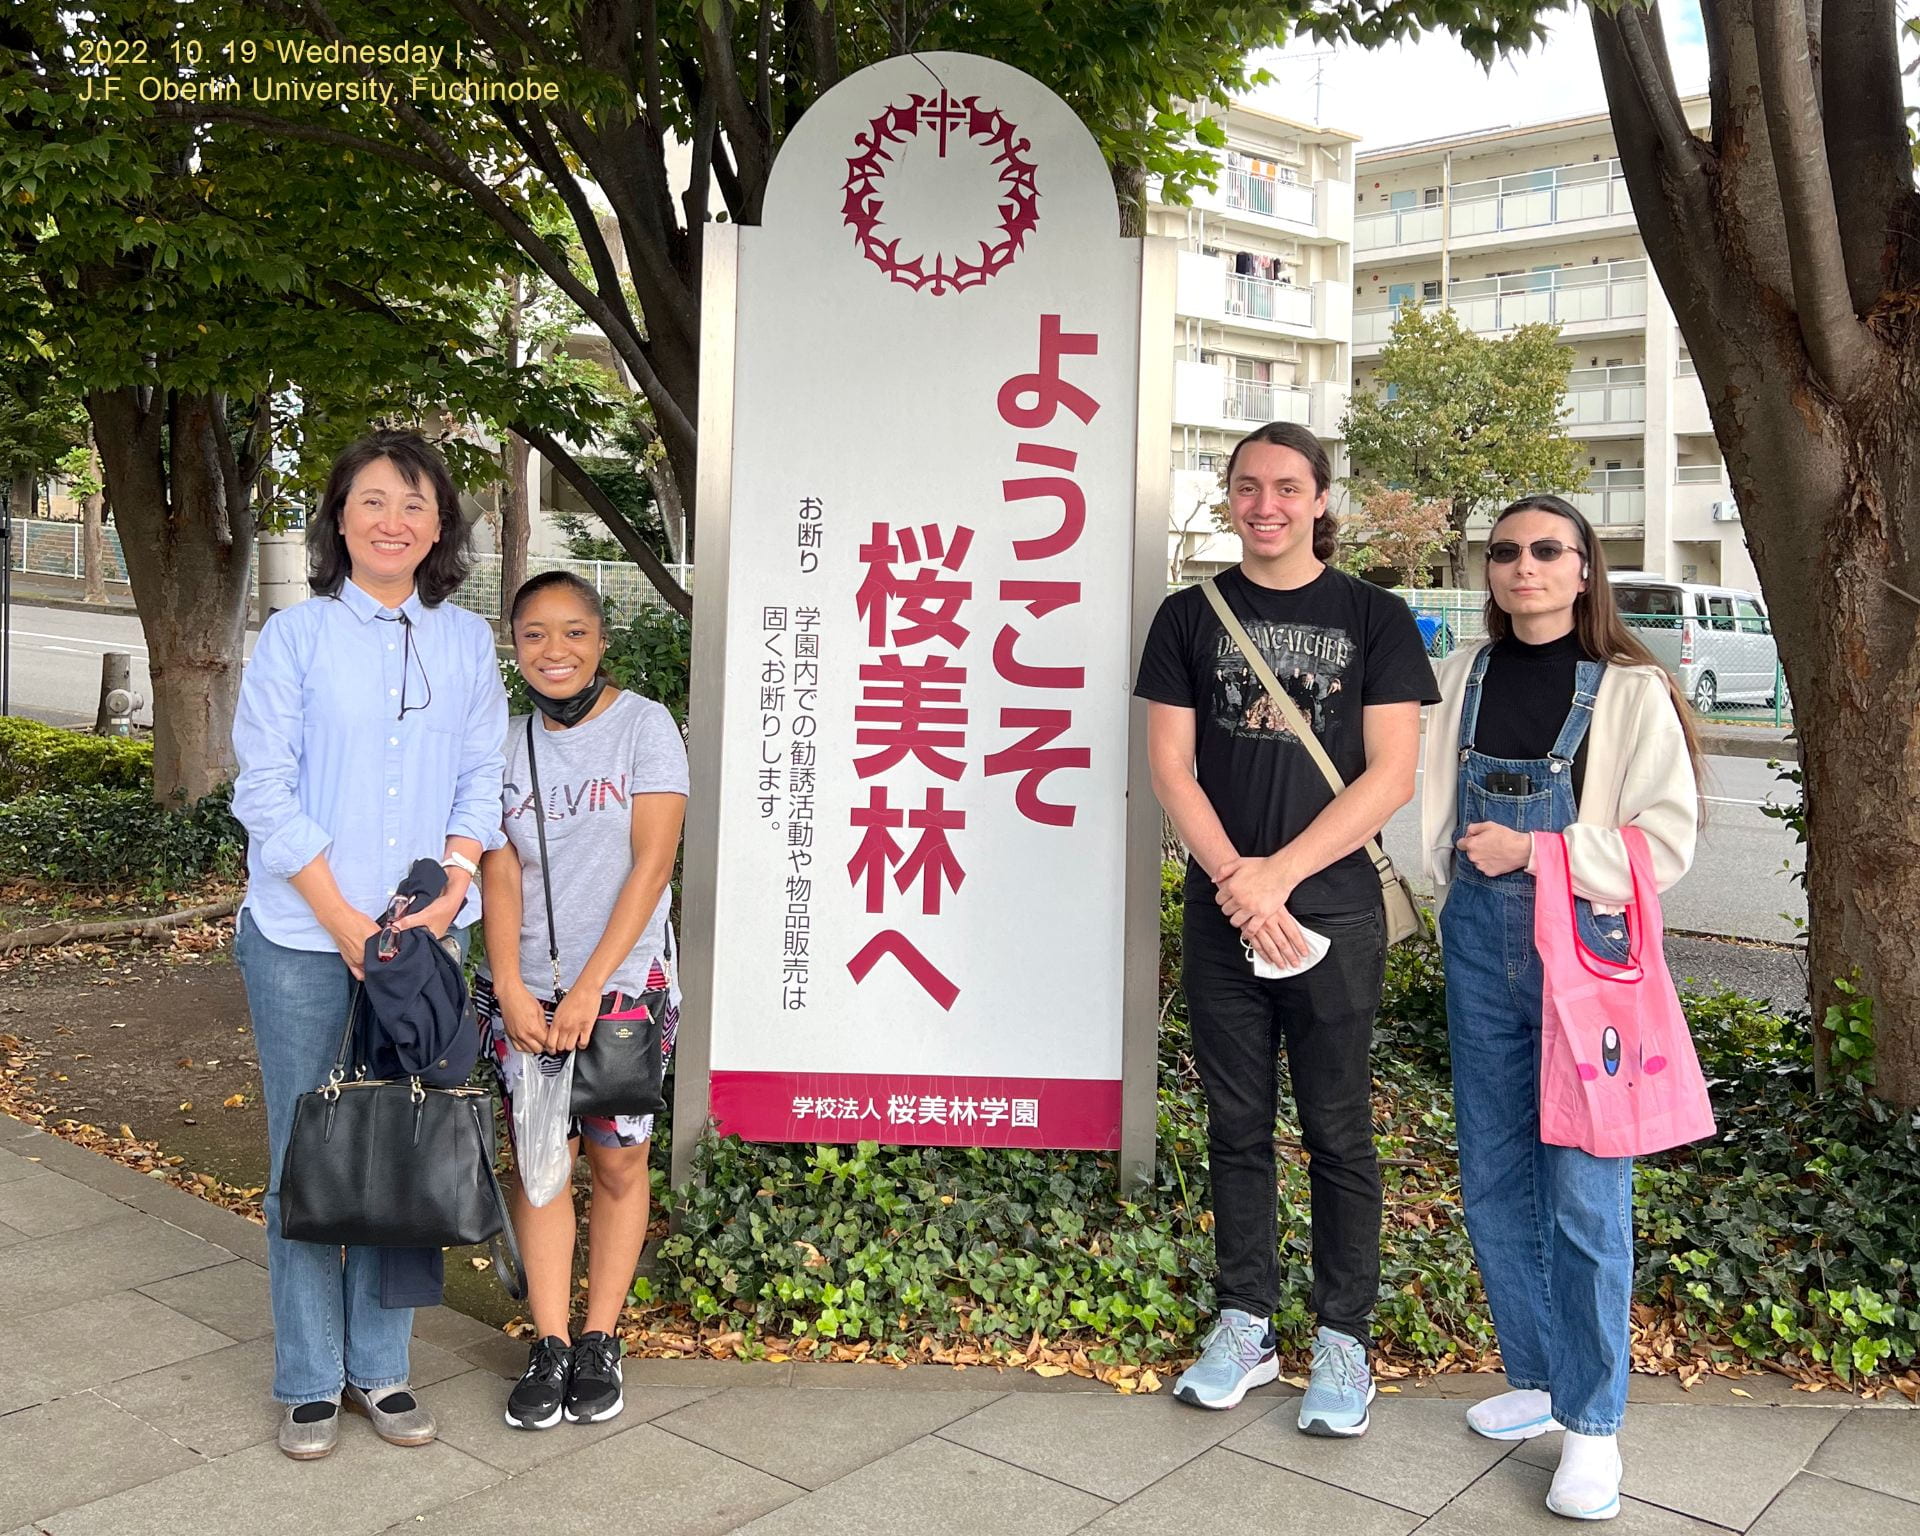 Dr. Jin Yang with UofM students attending J.F. Oberlin University in Japan.